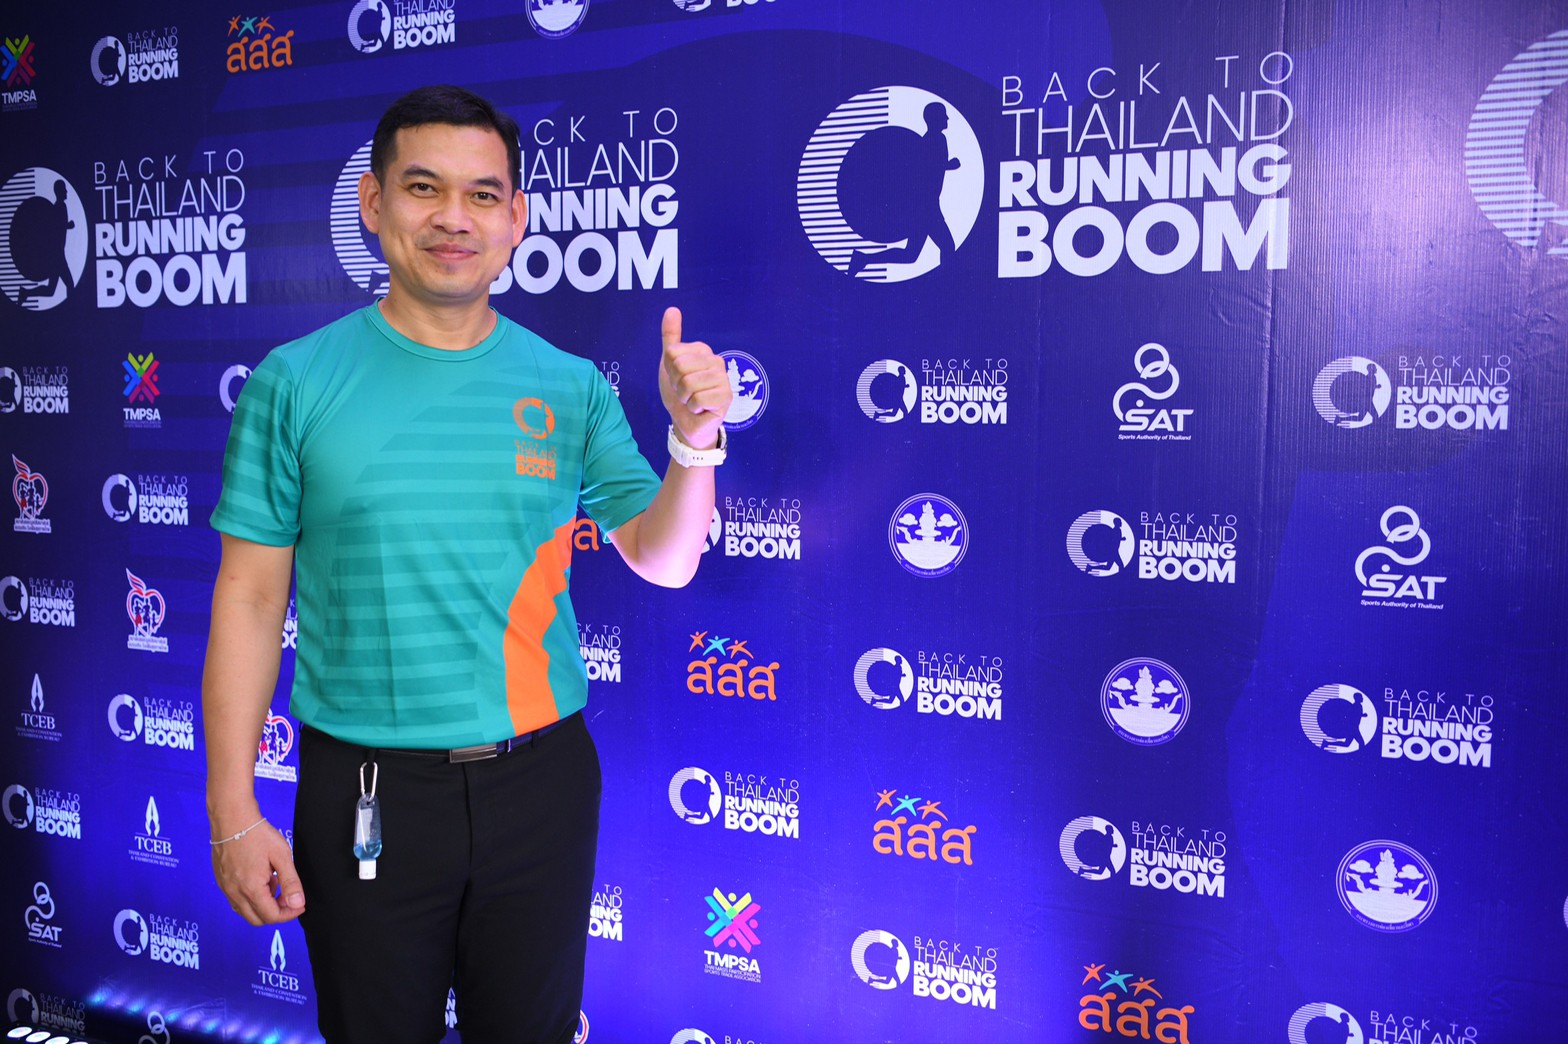 “Back to Thailand Running Boom” the New-Normal Running Event thaihealth